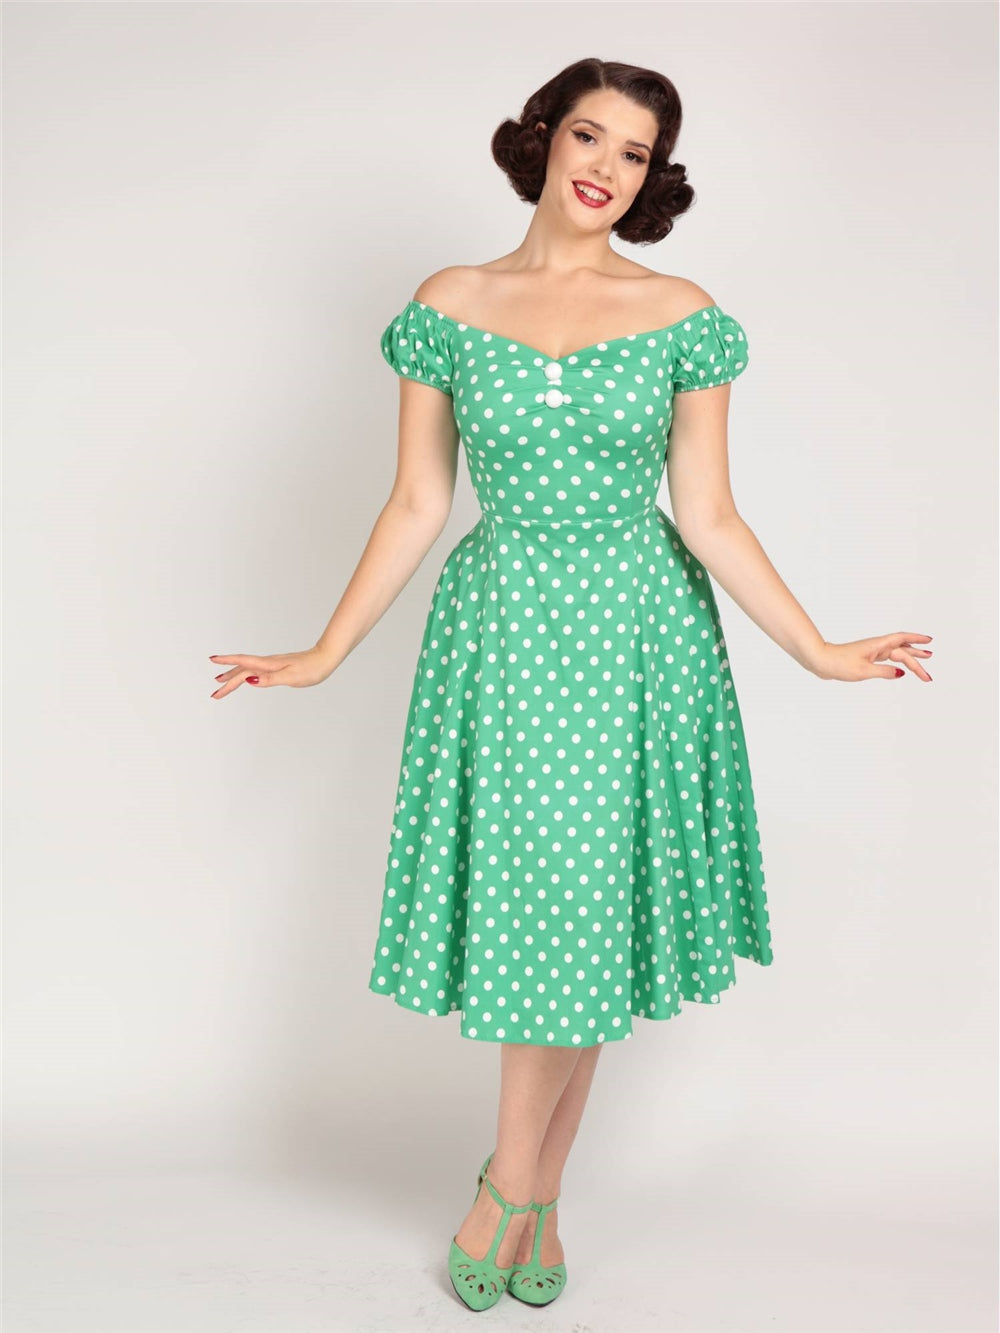 Dolores Classic Polka Doll Dress by Collectif